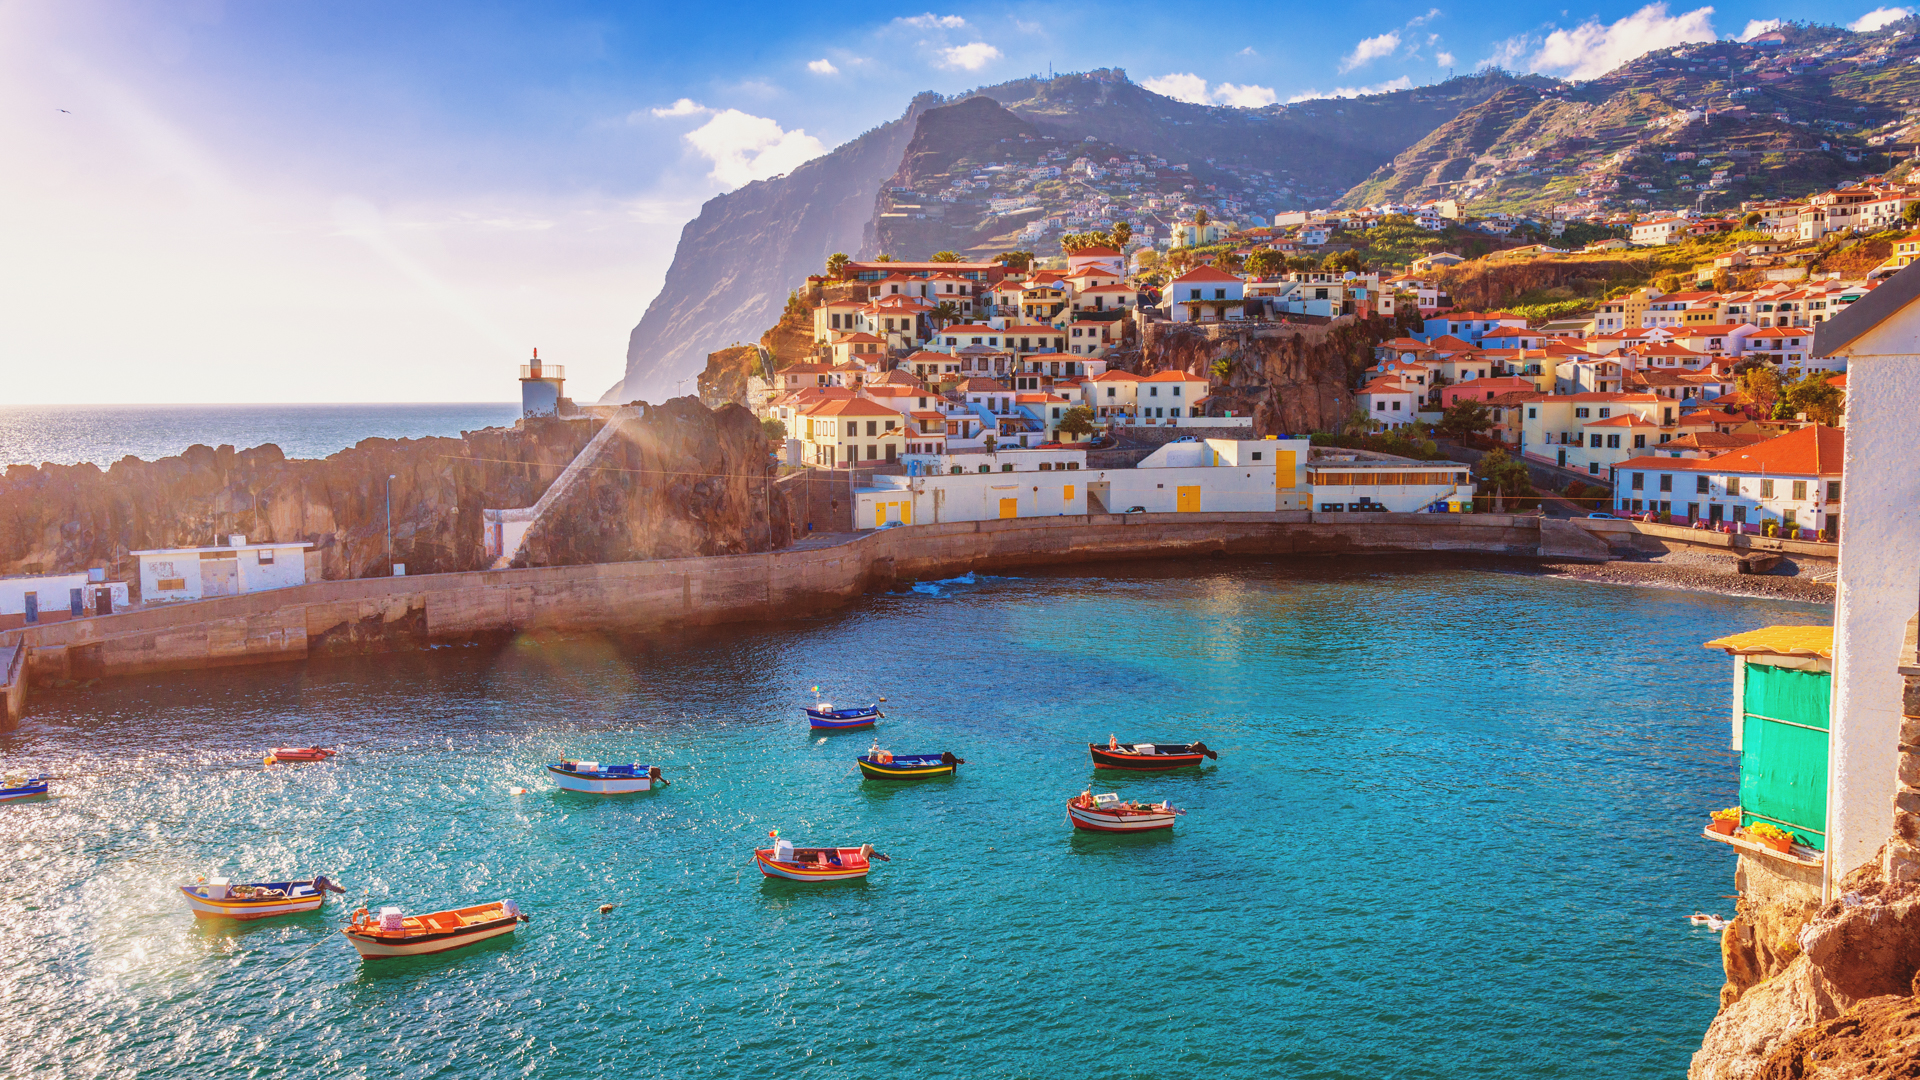 #5 Places To Live in Europe That Are So Cheap You Could Quit Your Job